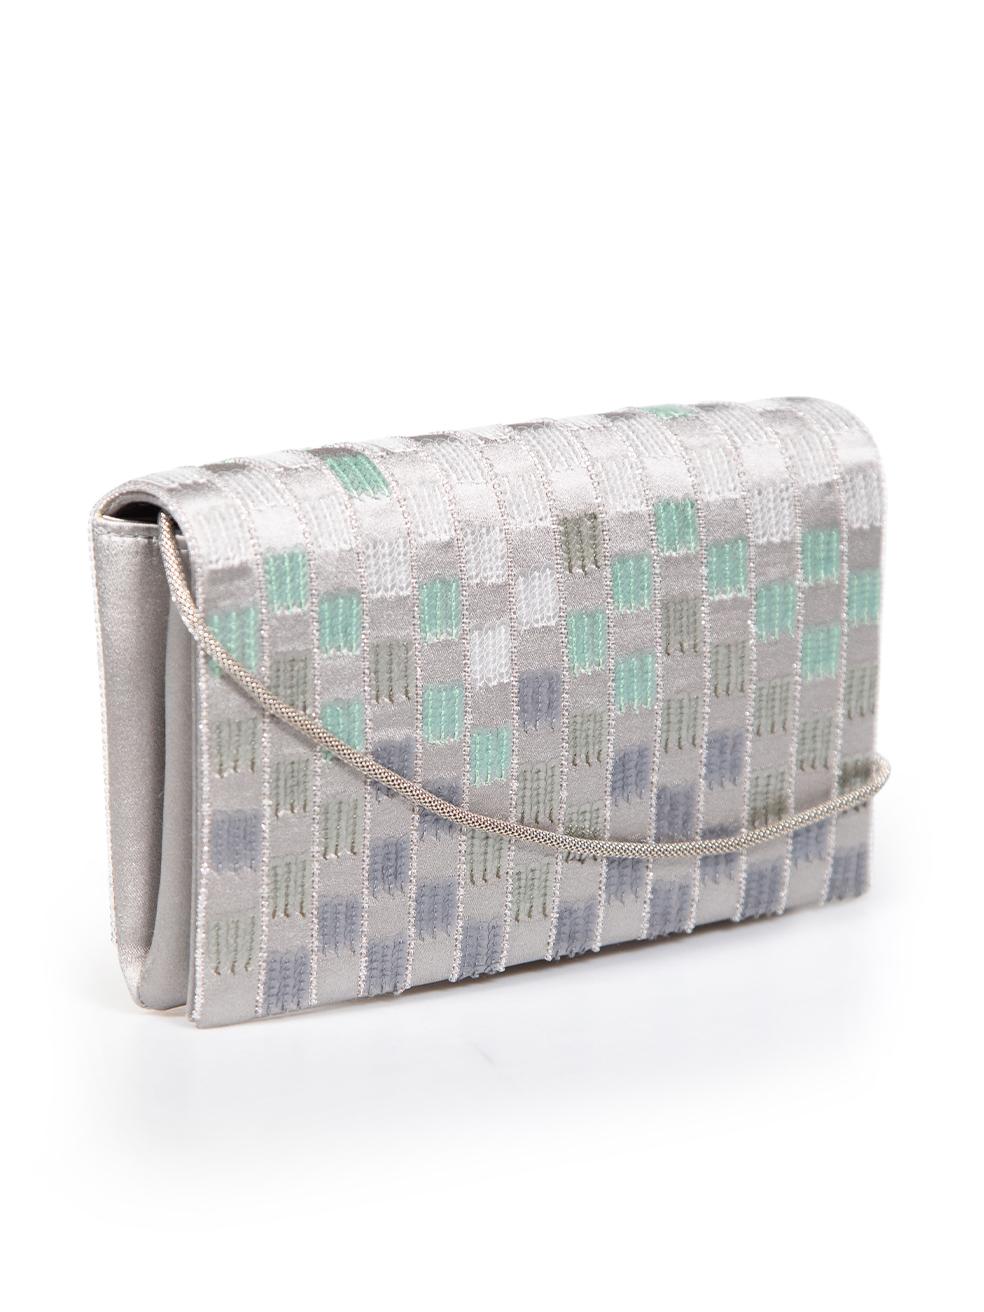 CONDITION is Never worn. No visible wear to bag is evident on this new Giorgio Armani designer resale item.
 
 
 
 Details
 
 
 Grey
 
 Cloth textile
 
 Mini clutch bag
 
 Sequin and bead embellished
 
 Flap with magnetic fastening
 
 Detachable